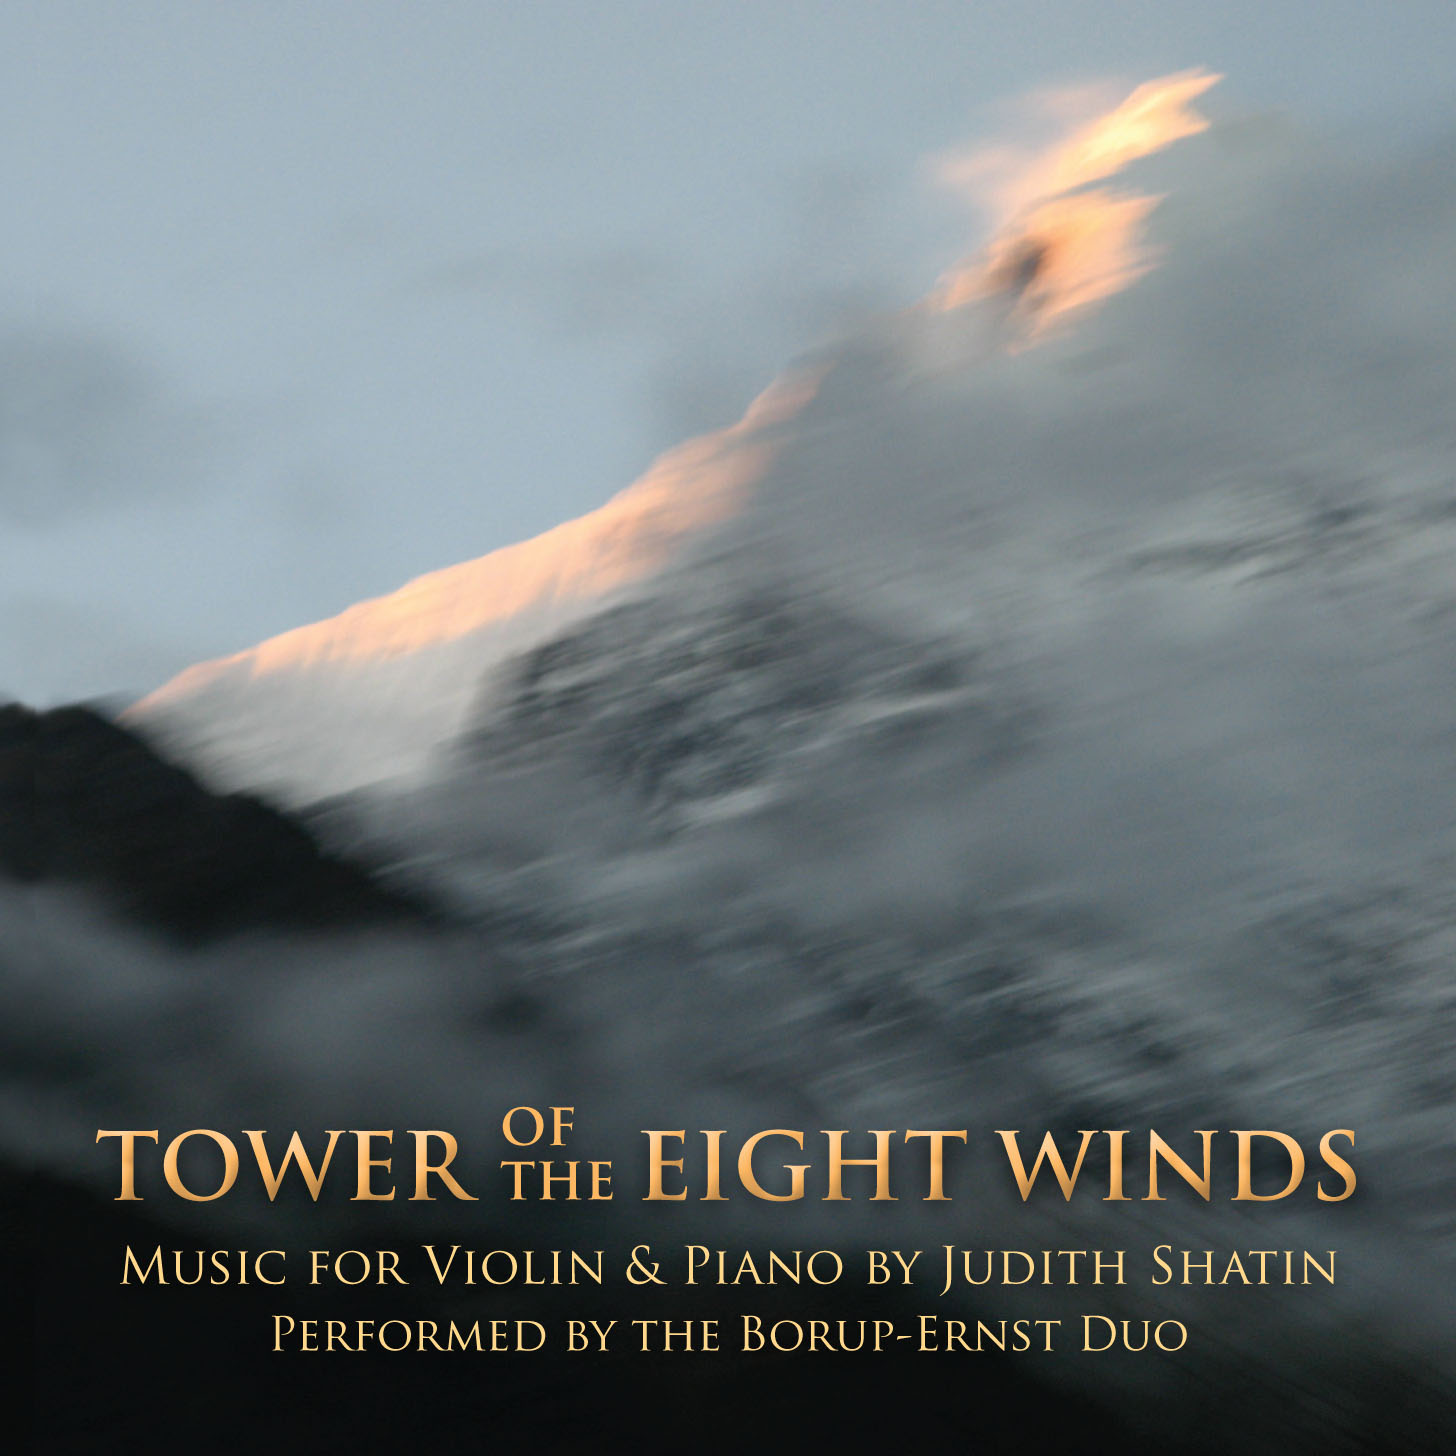 Tower of the Eight Winds